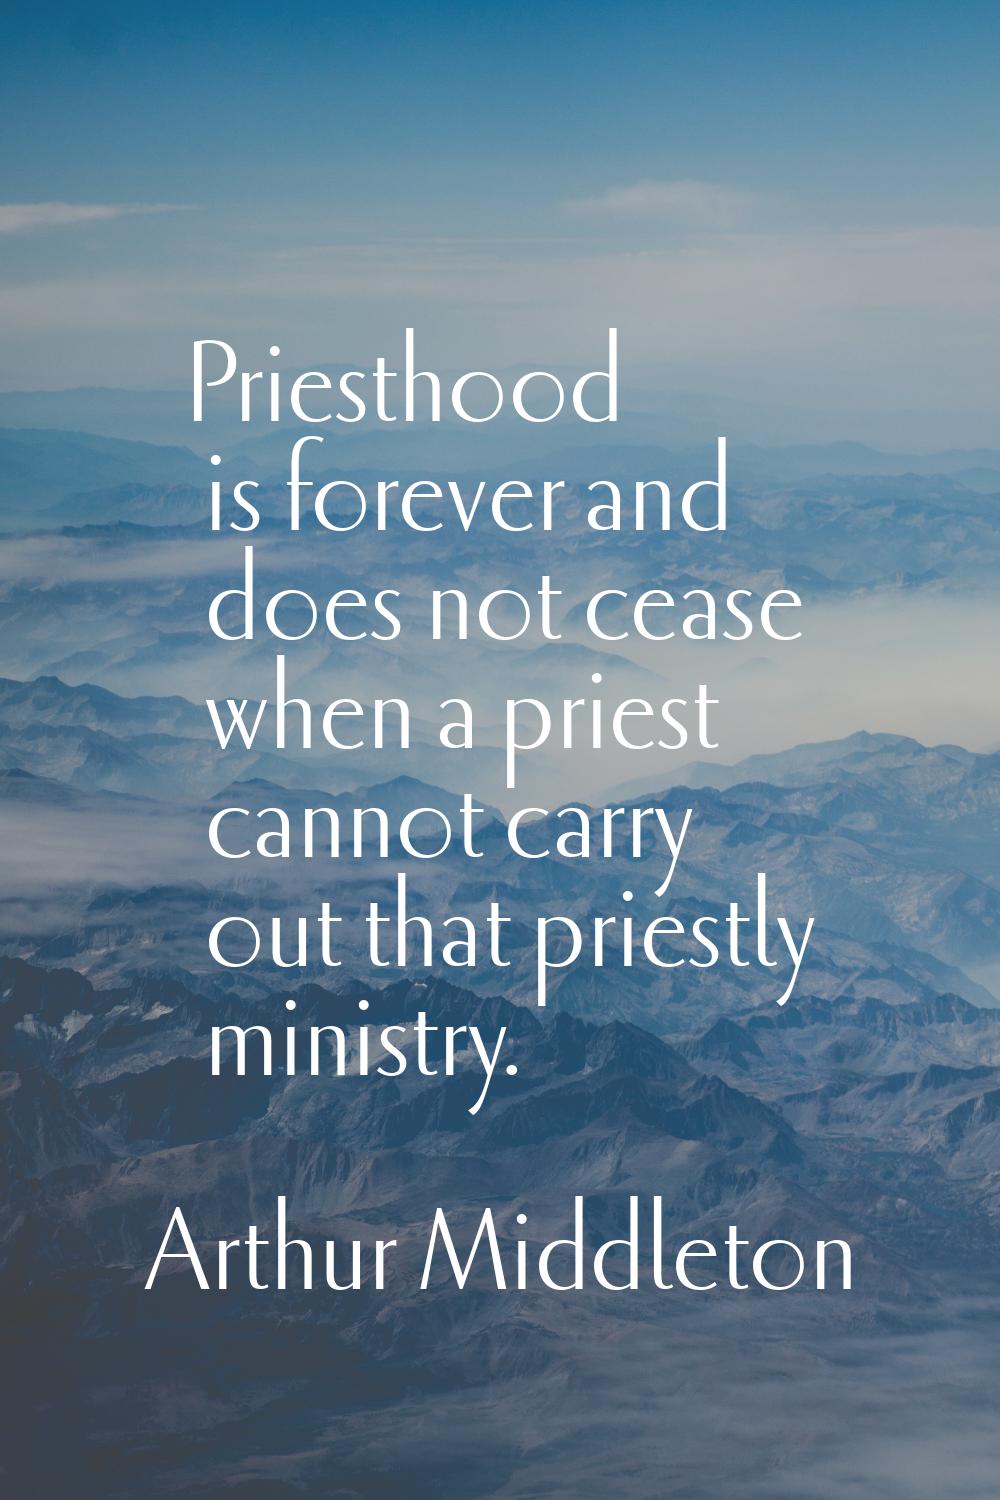 Priesthood is forever and does not cease when a priest cannot carry out that priestly ministry.